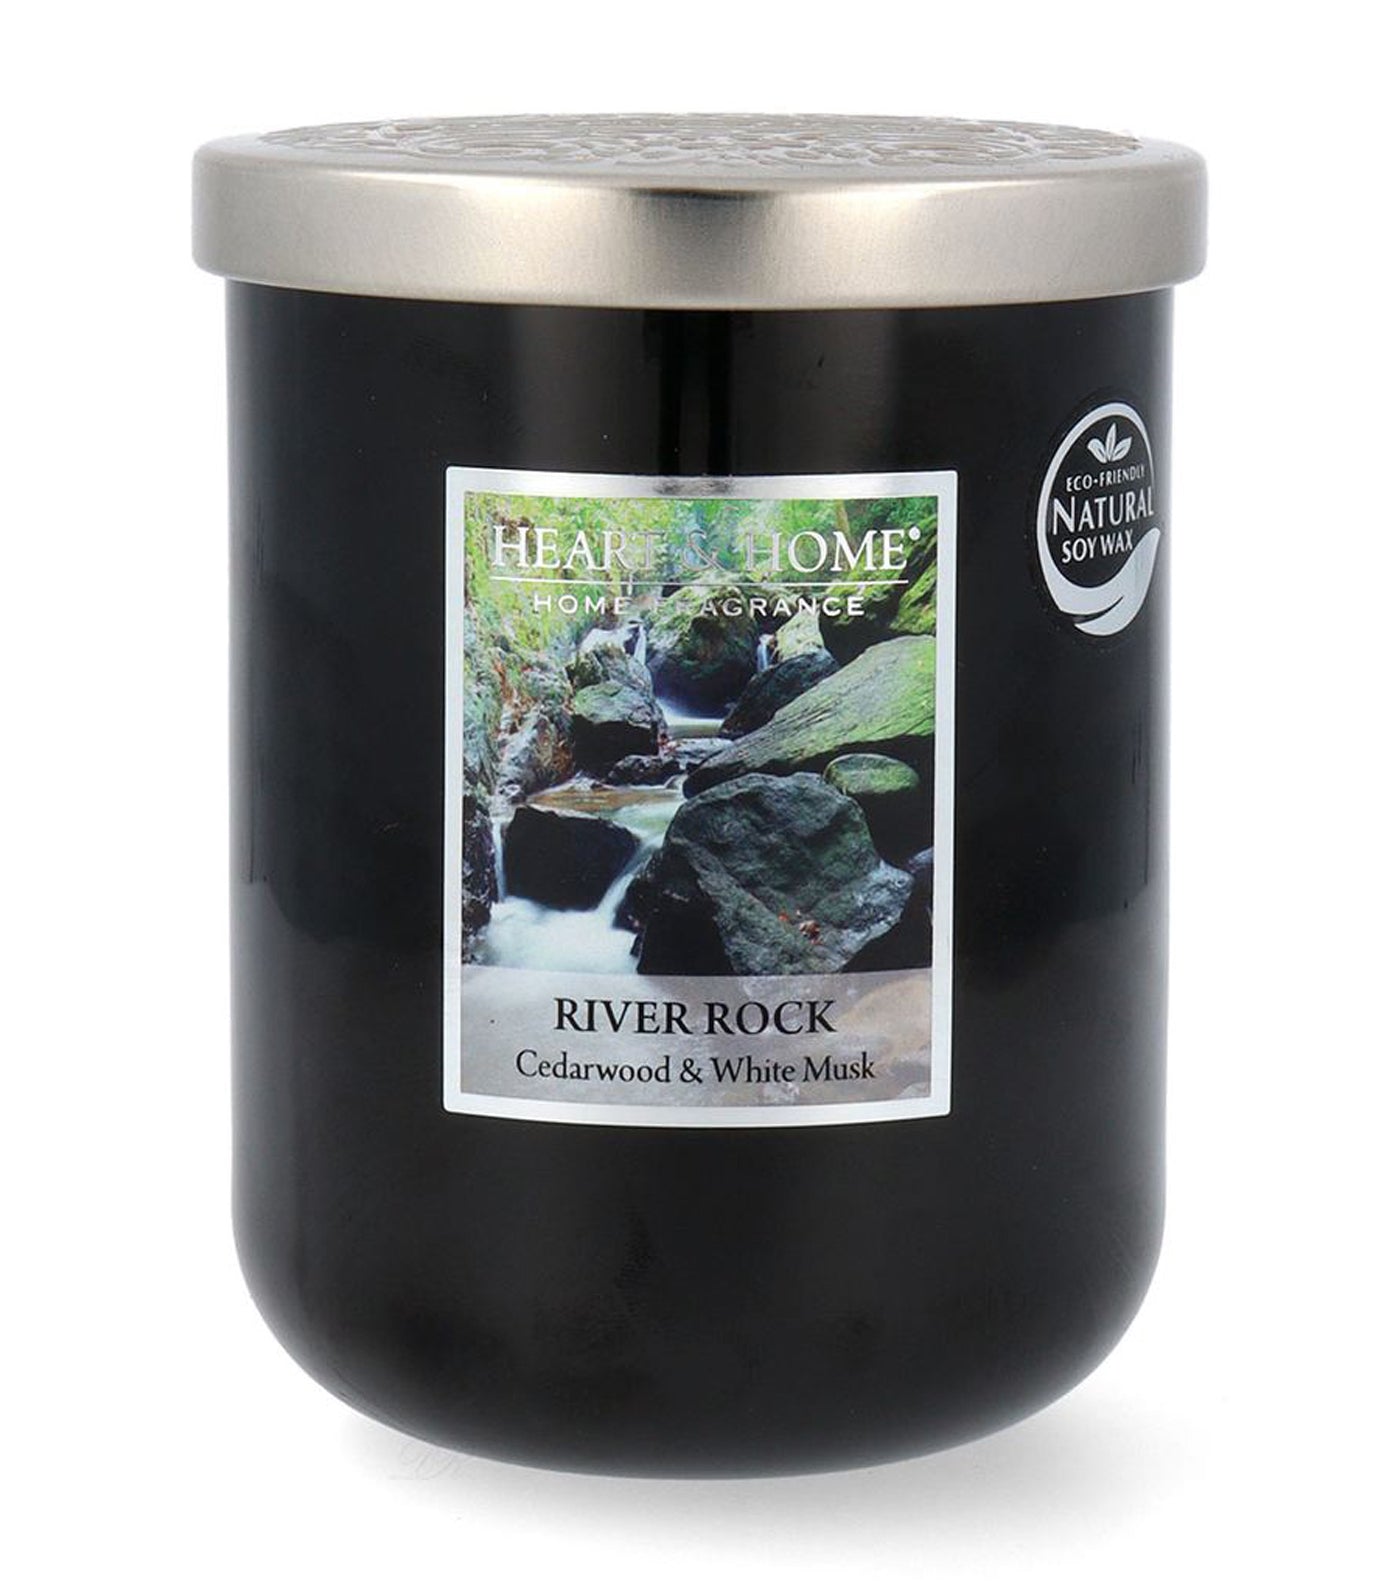 heart & home river rock - large soy wax candle